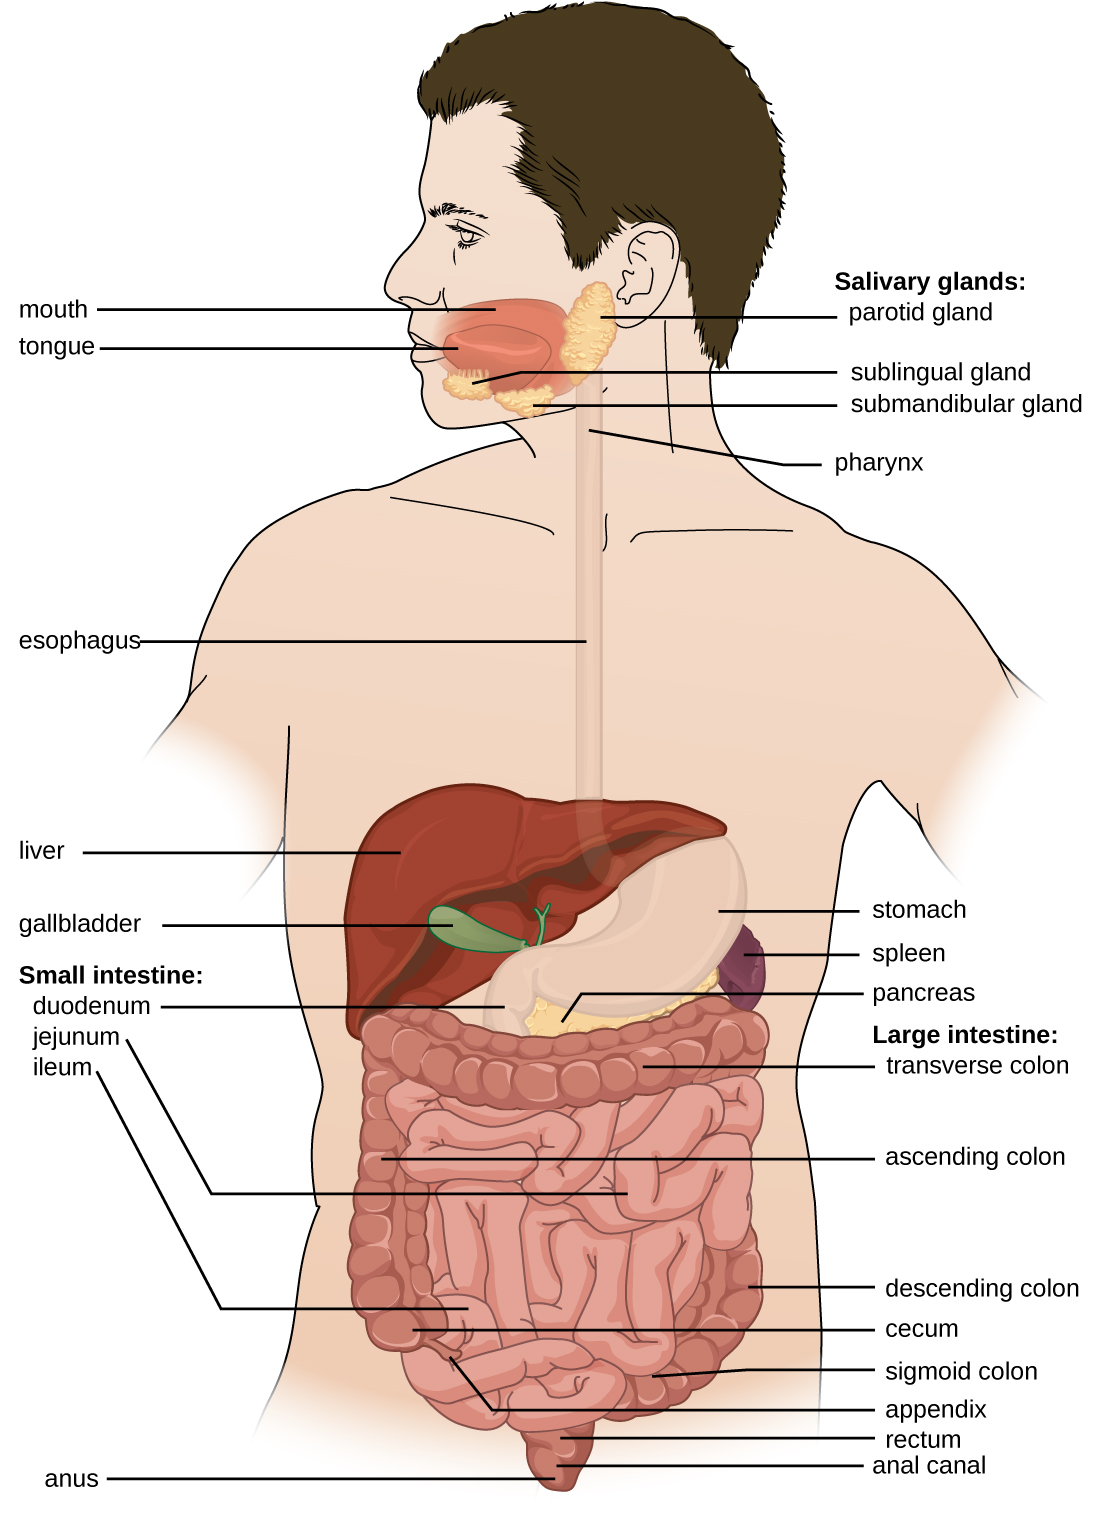 24.1: Anatomy and Normal Microbiota of the Digestive ...